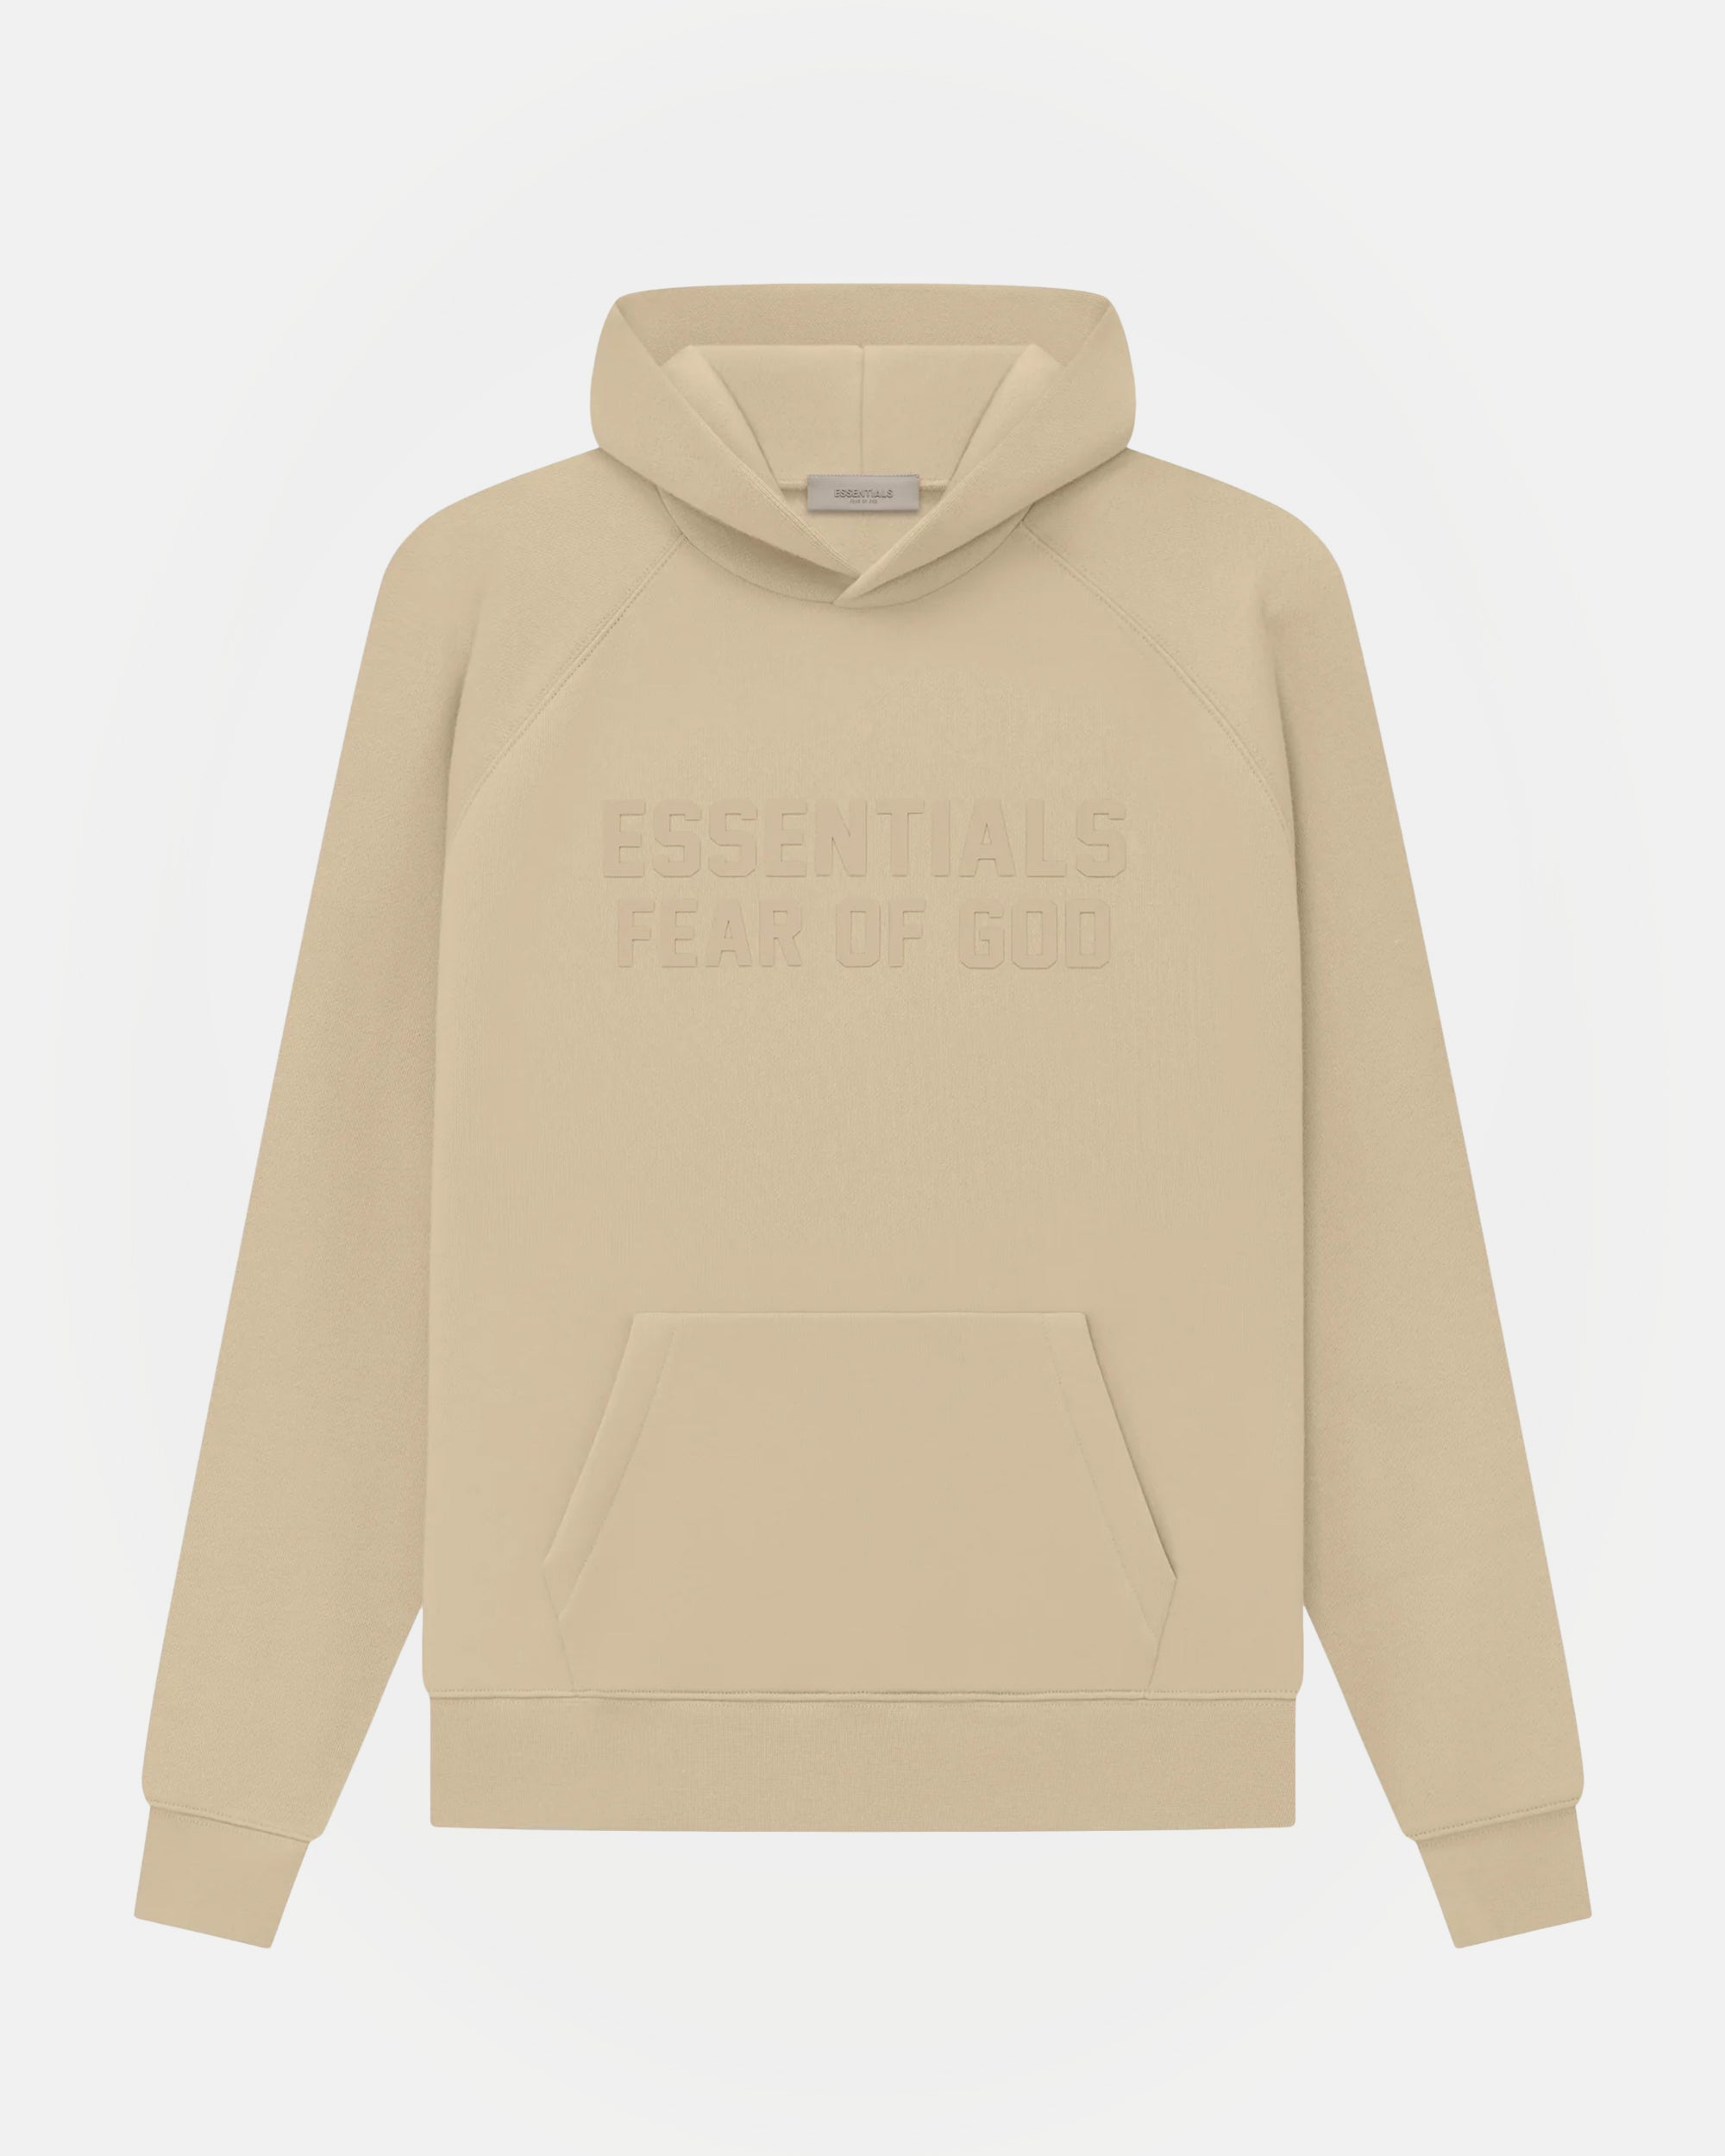 Fear of God Essentials SS22 Collection | Roden Gray